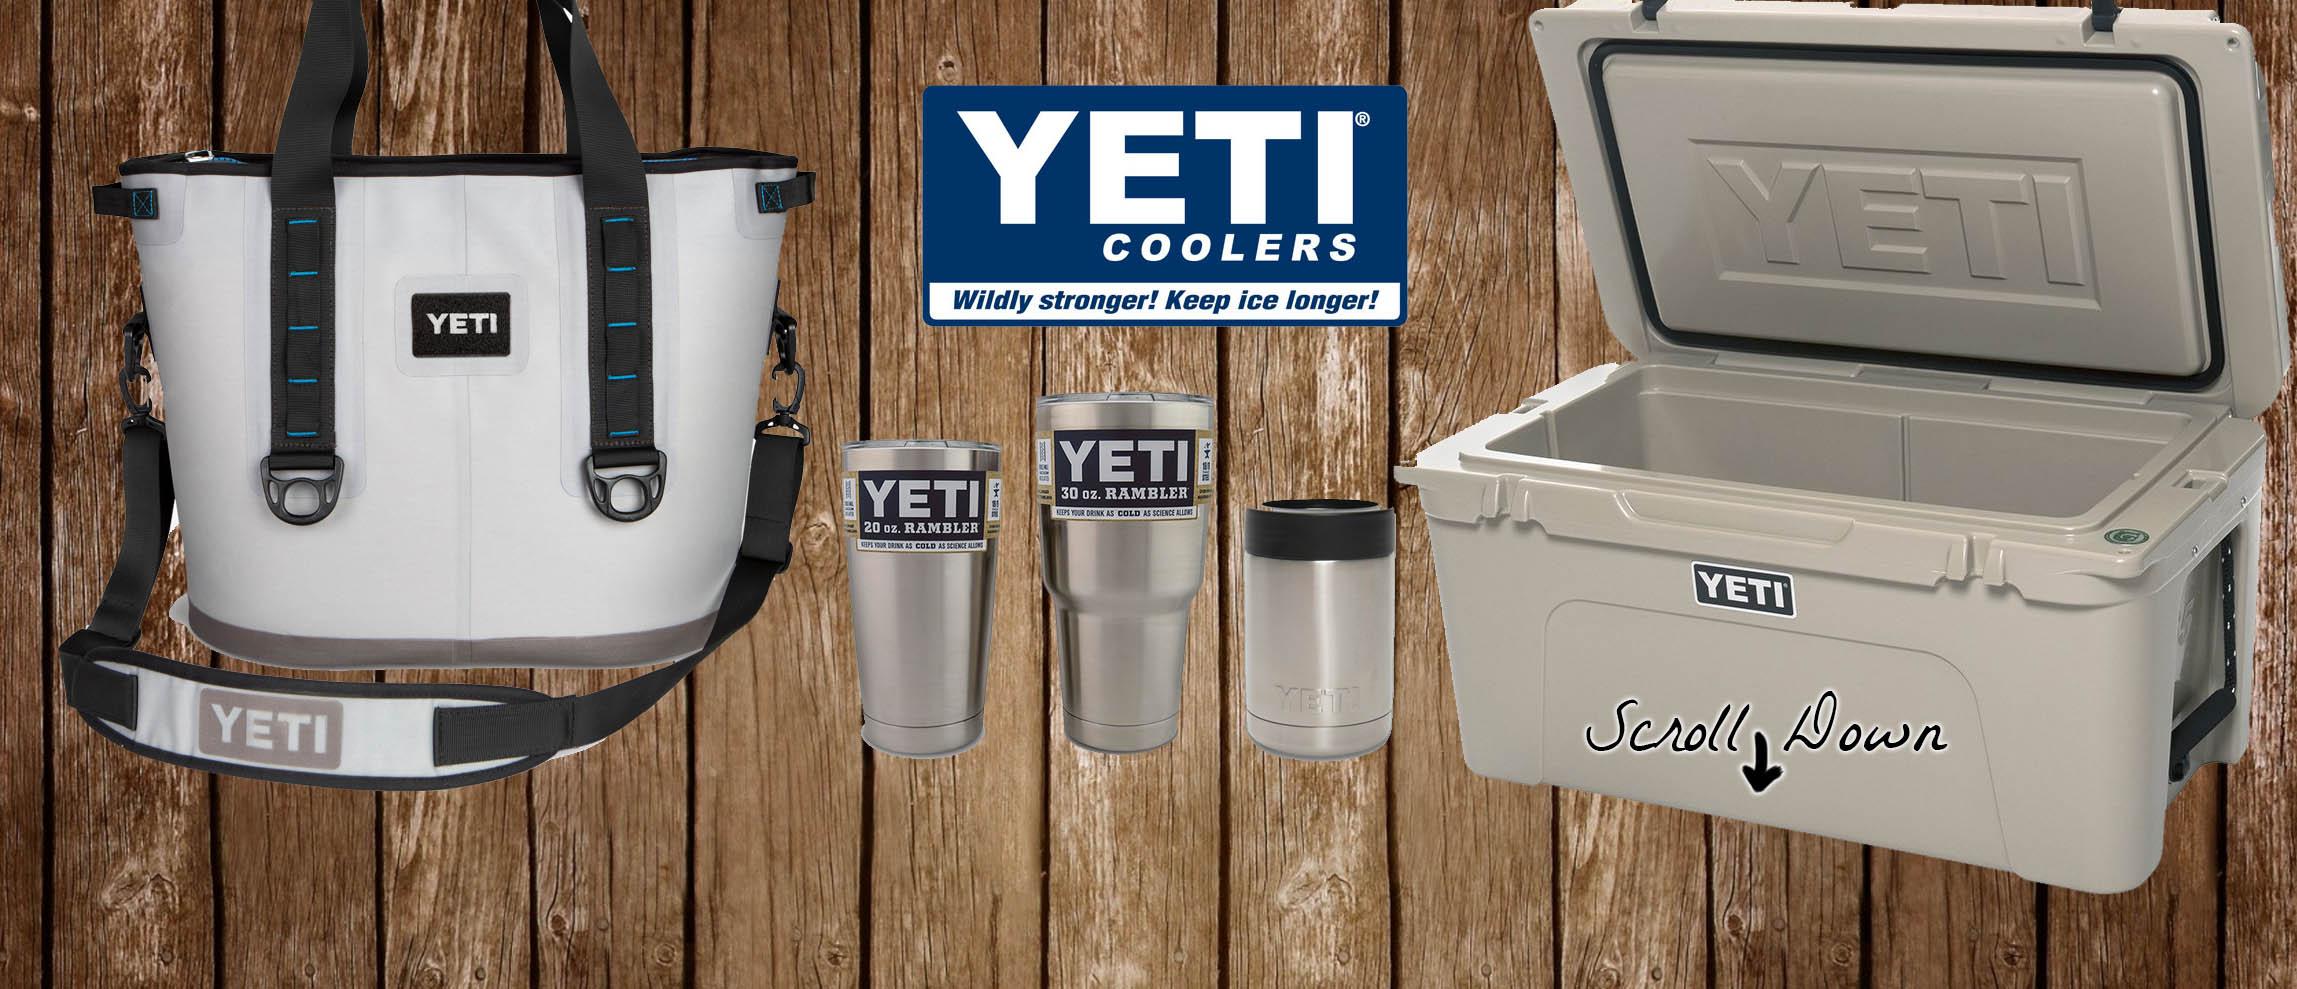 Yeti cooler ipo guide to tax efficient investing techniques